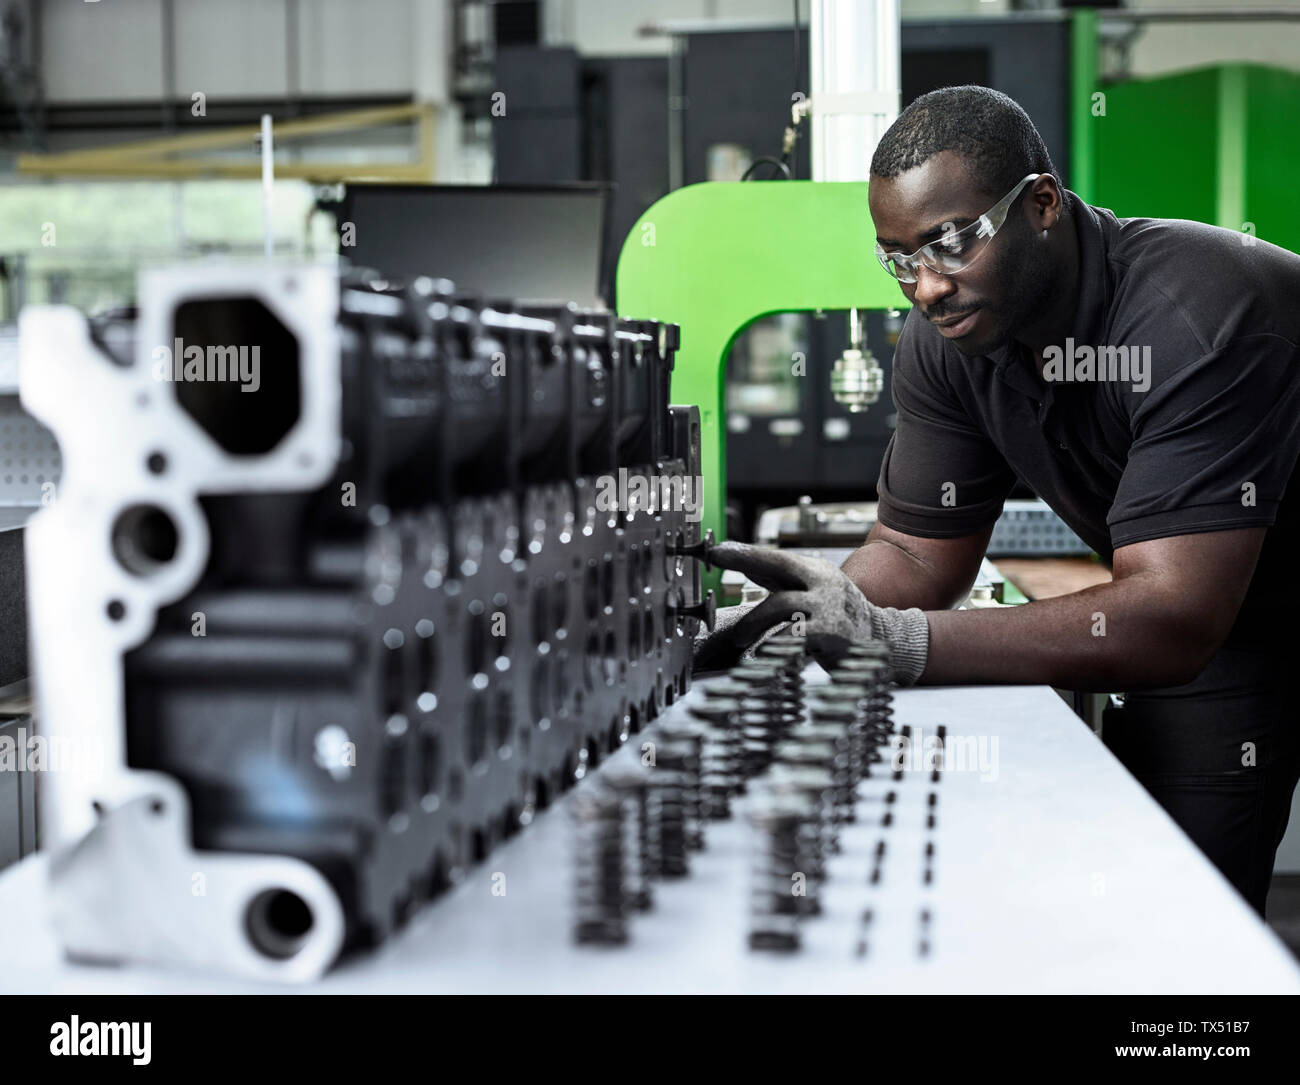 Man working, checking components Stock Photo